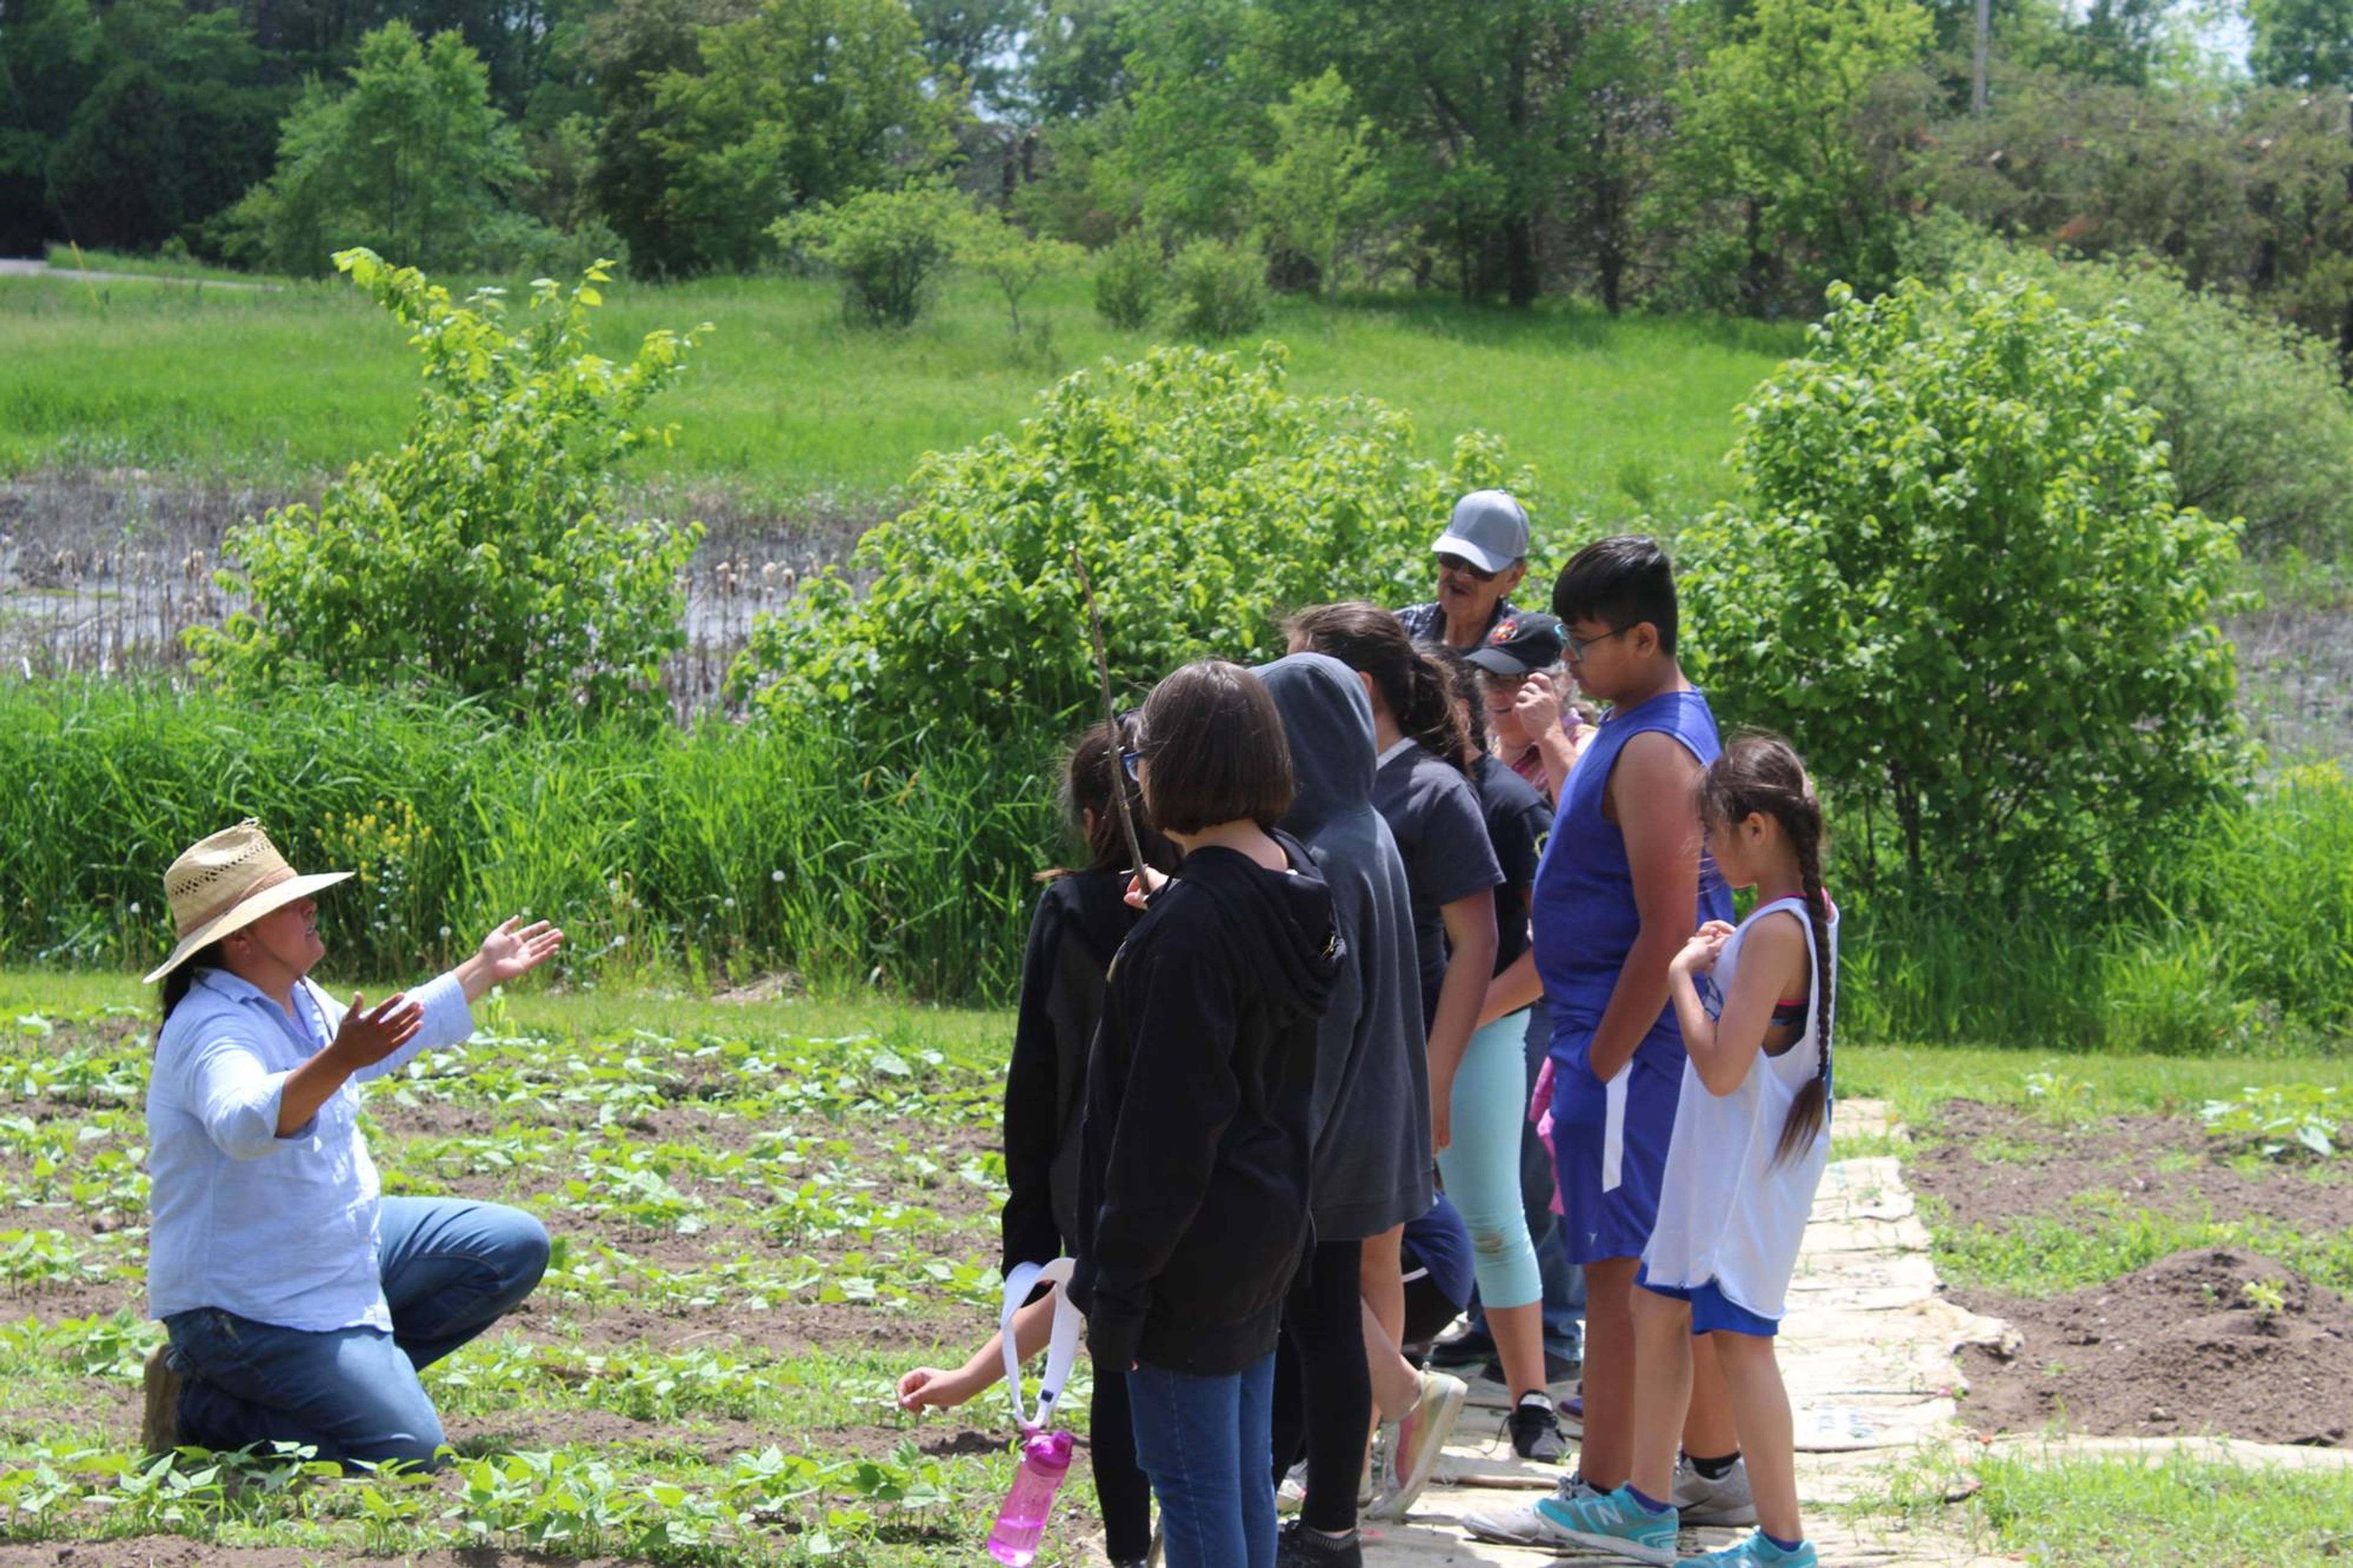 Jessika Greendeer of Dream of Wild Health Farm provides a lesson to the youth in the seed garden.